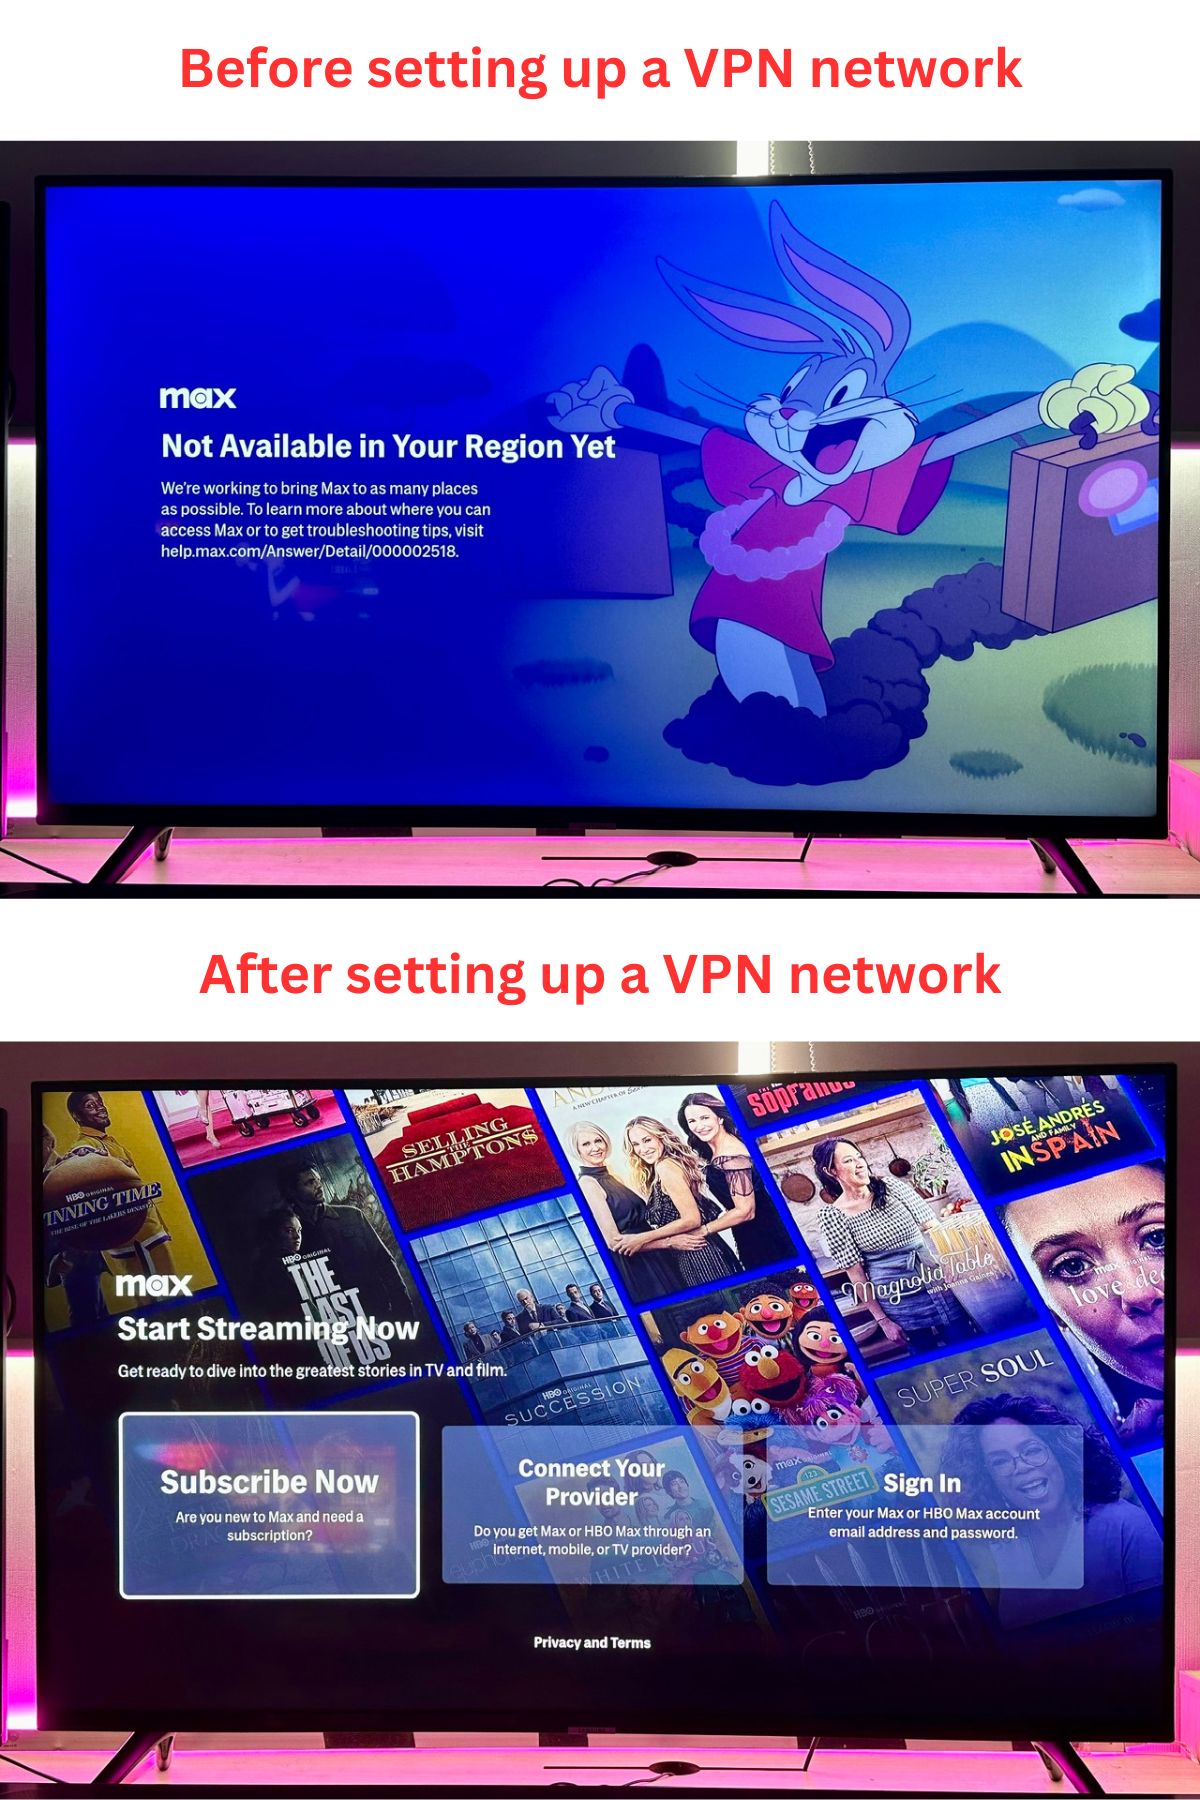 max app shows different screens before and after setting up a vpn network